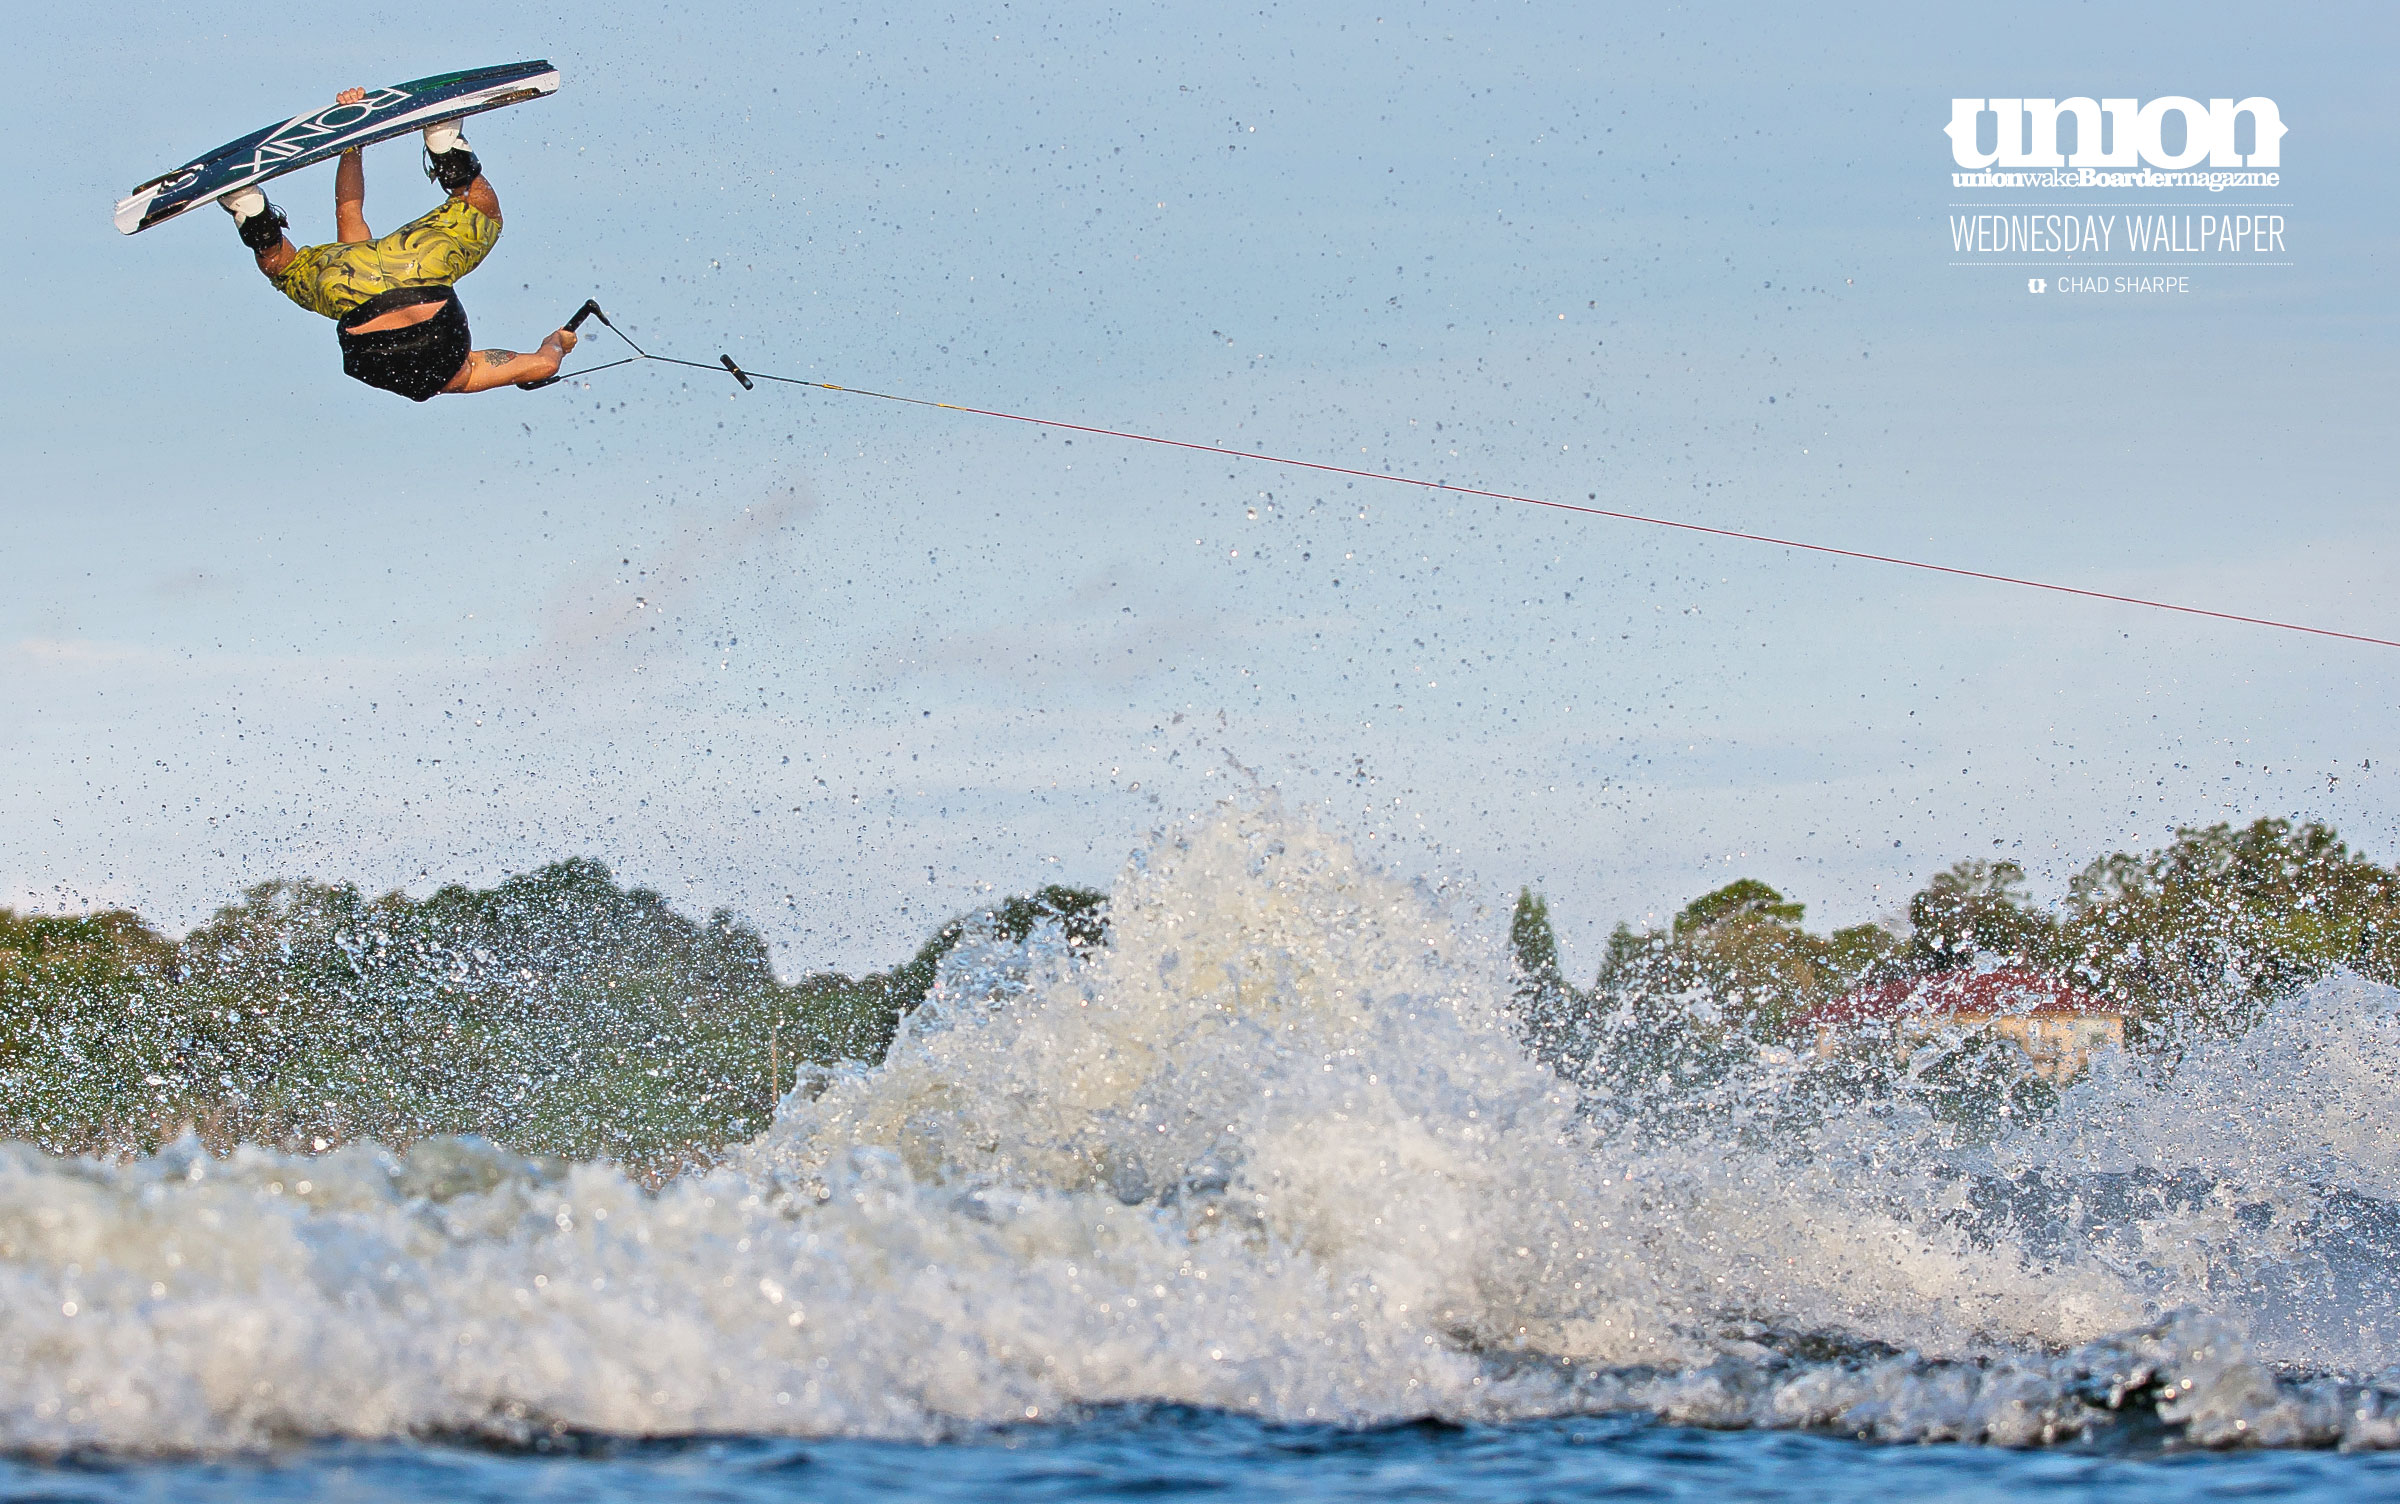 Ronix Wakeboard Wallpaper On Thursday For